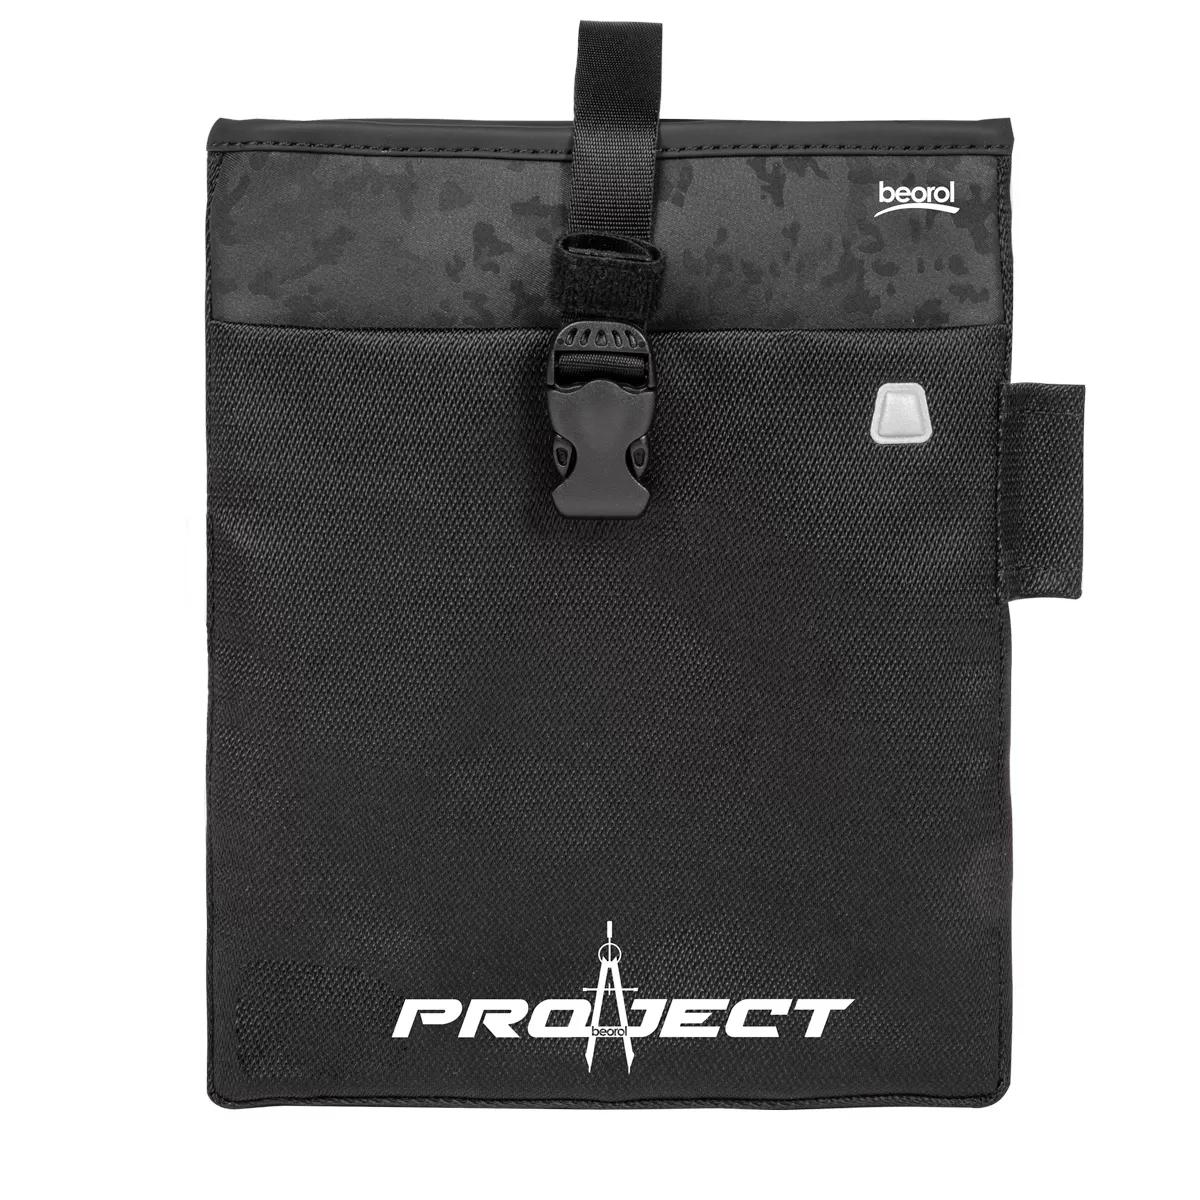 PROJECT tablet pouch 